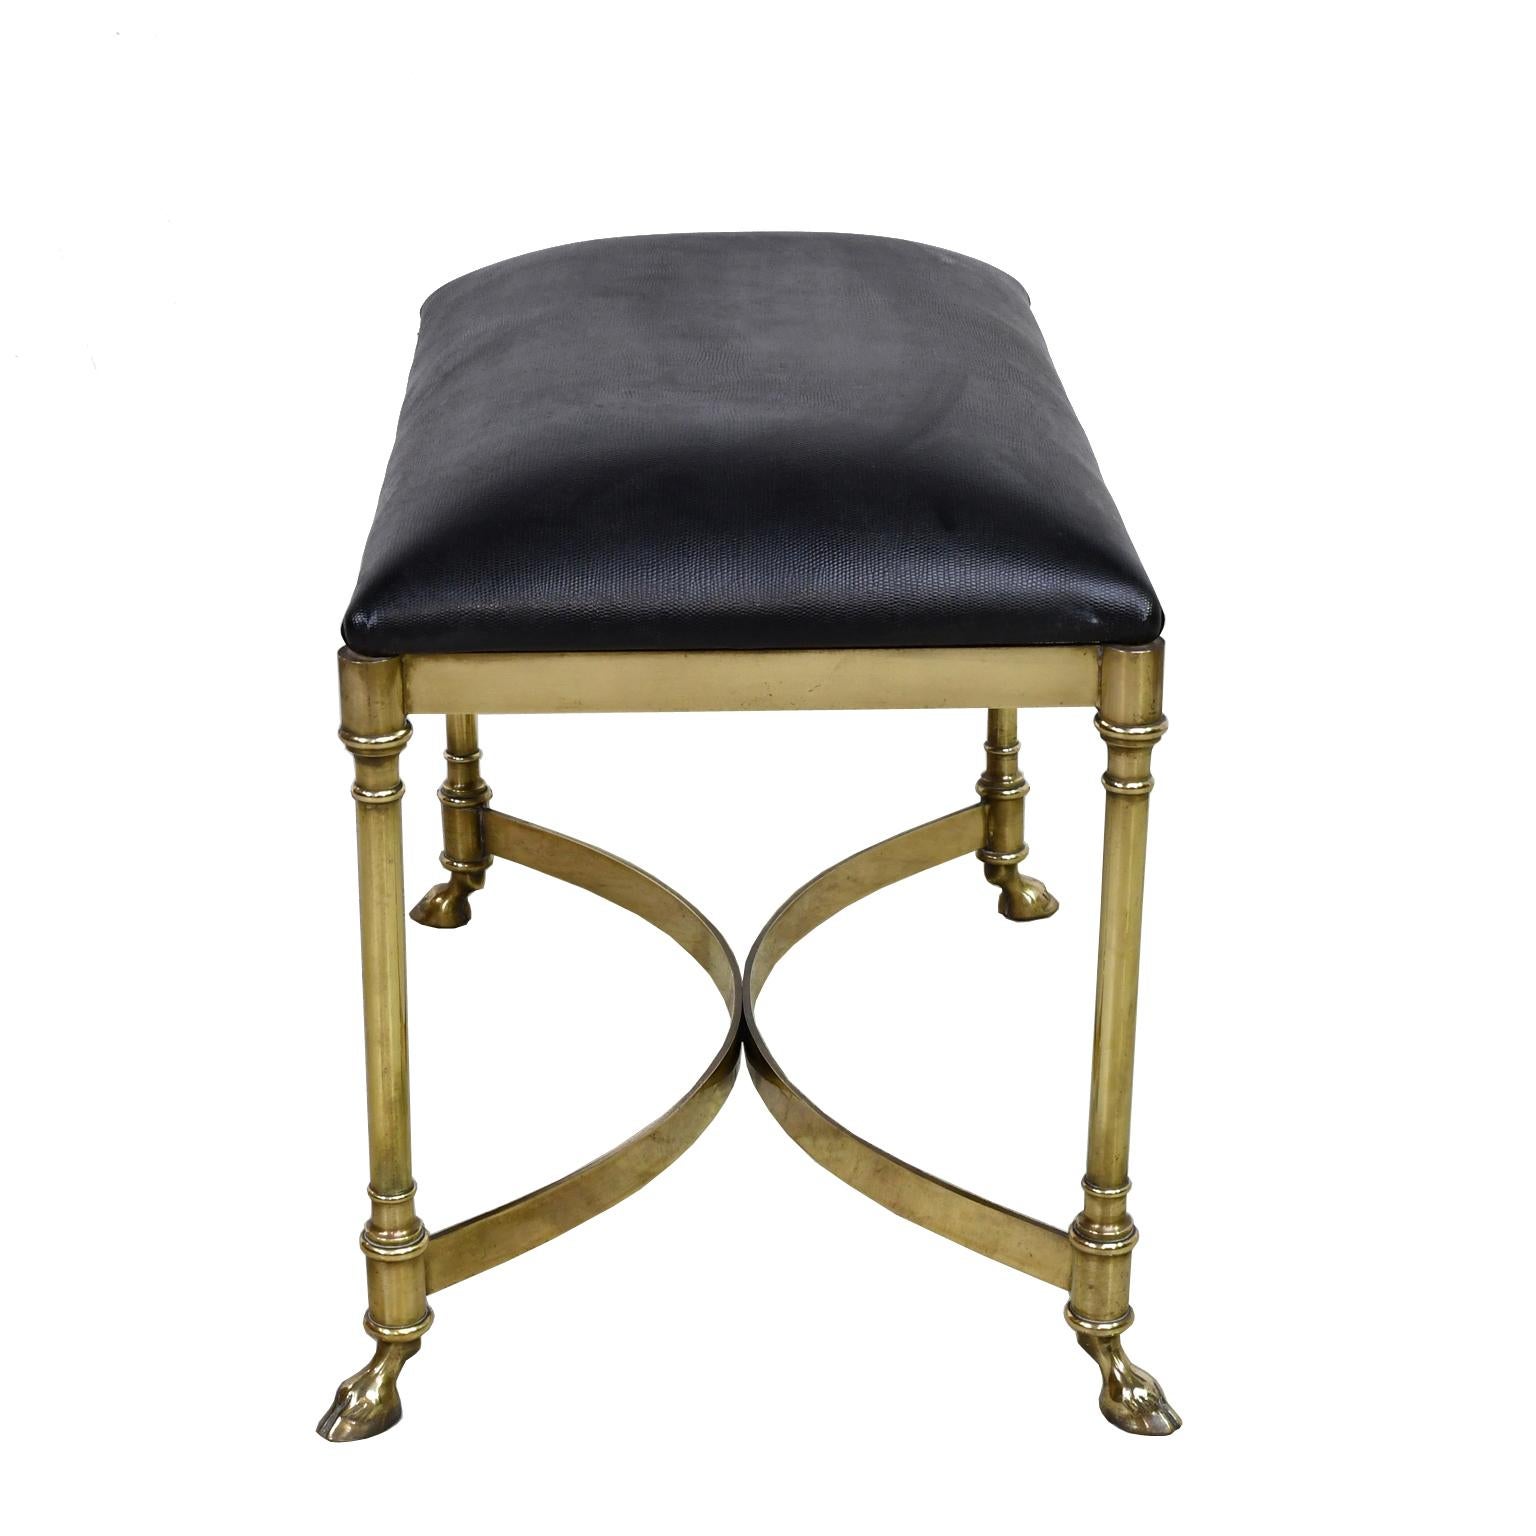 Mid-20th Century Neoclassical-Style Vintage Italian Stool w/ Brass Frame & Black Upholstered Seat